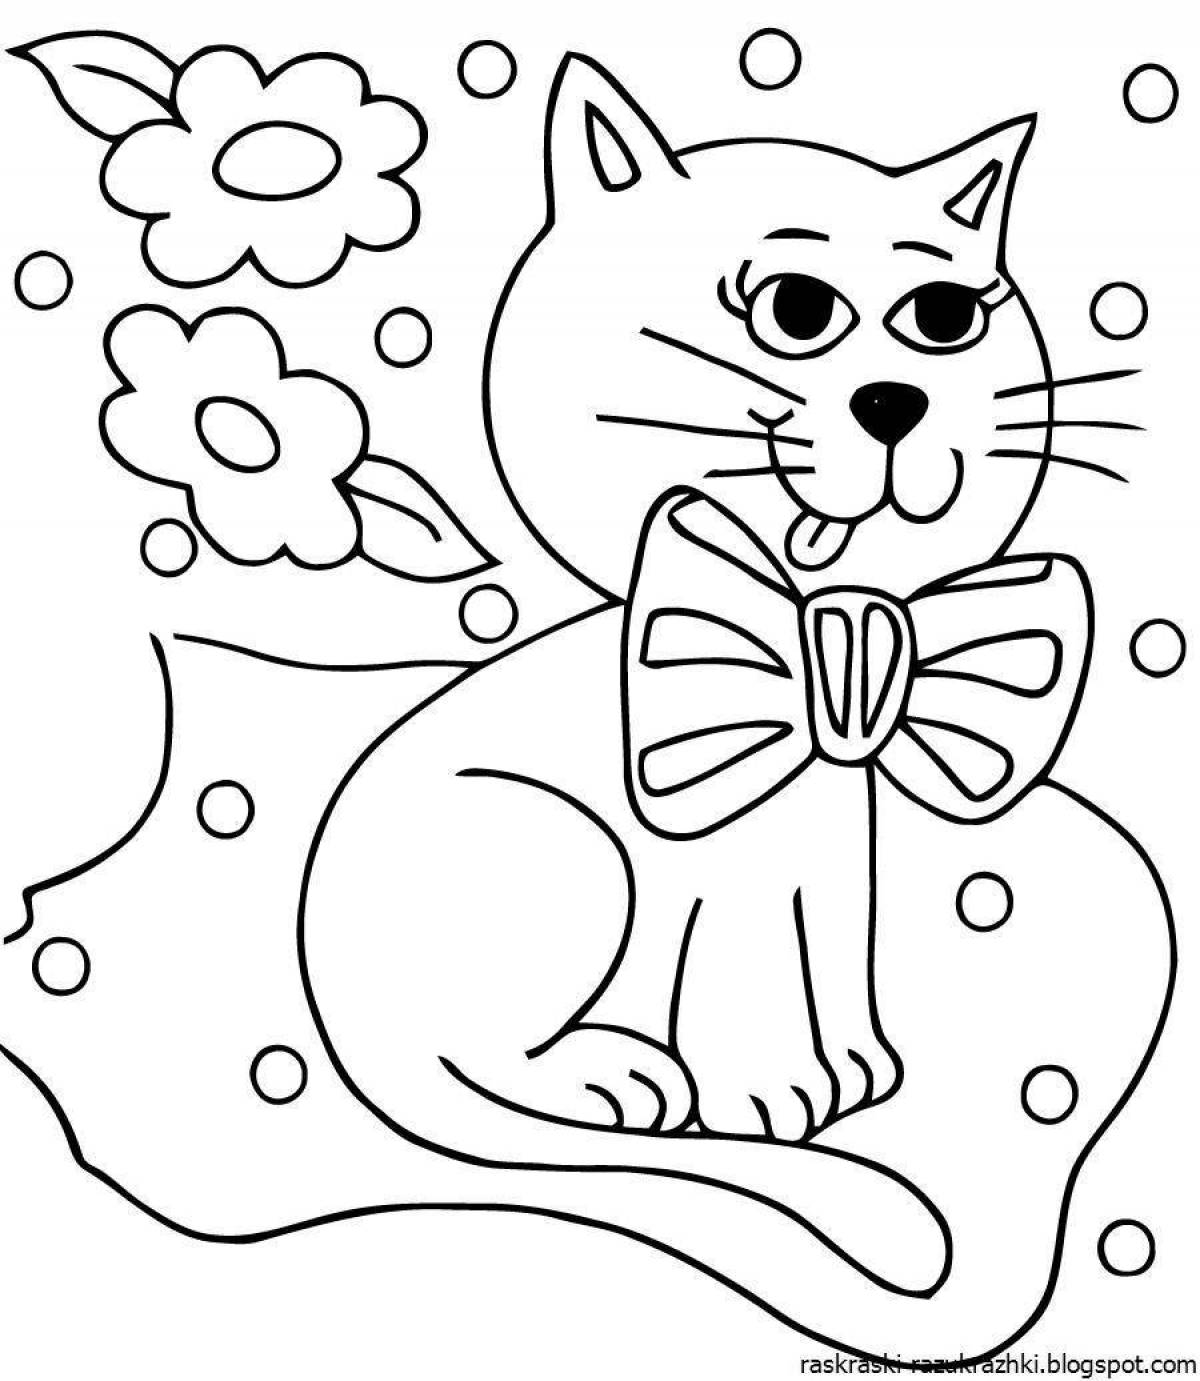 Fancy kitty coloring book for kids 6-7 years old